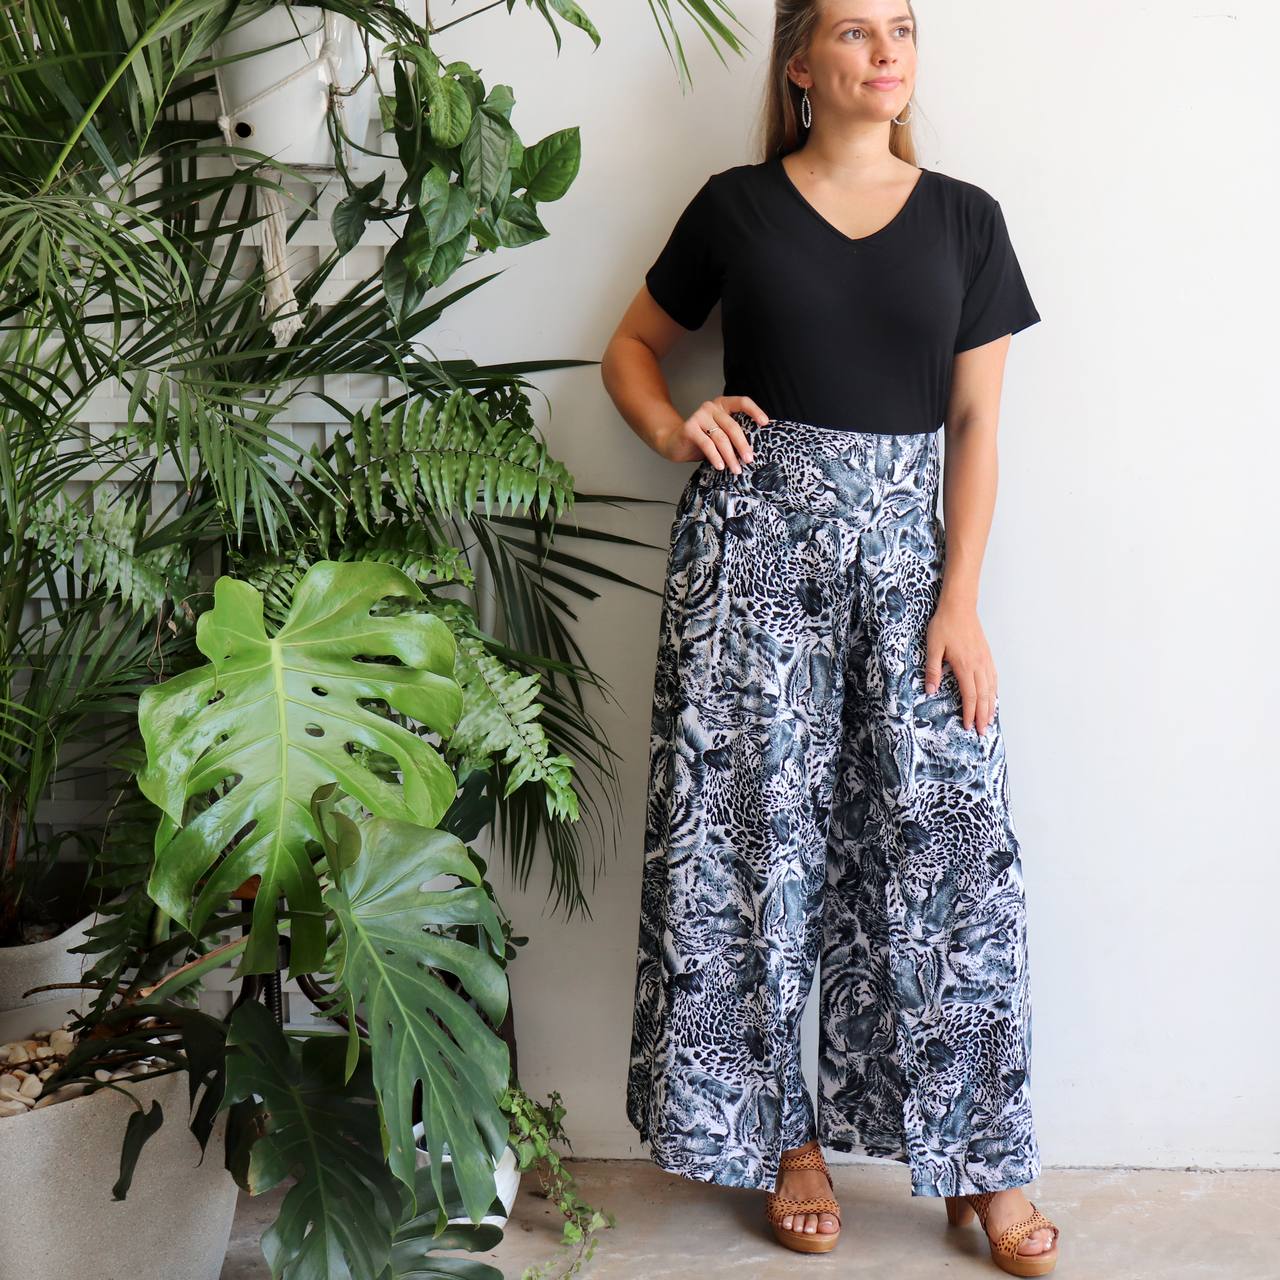 wrapped up in wrap pants |style| – Summer of Diane